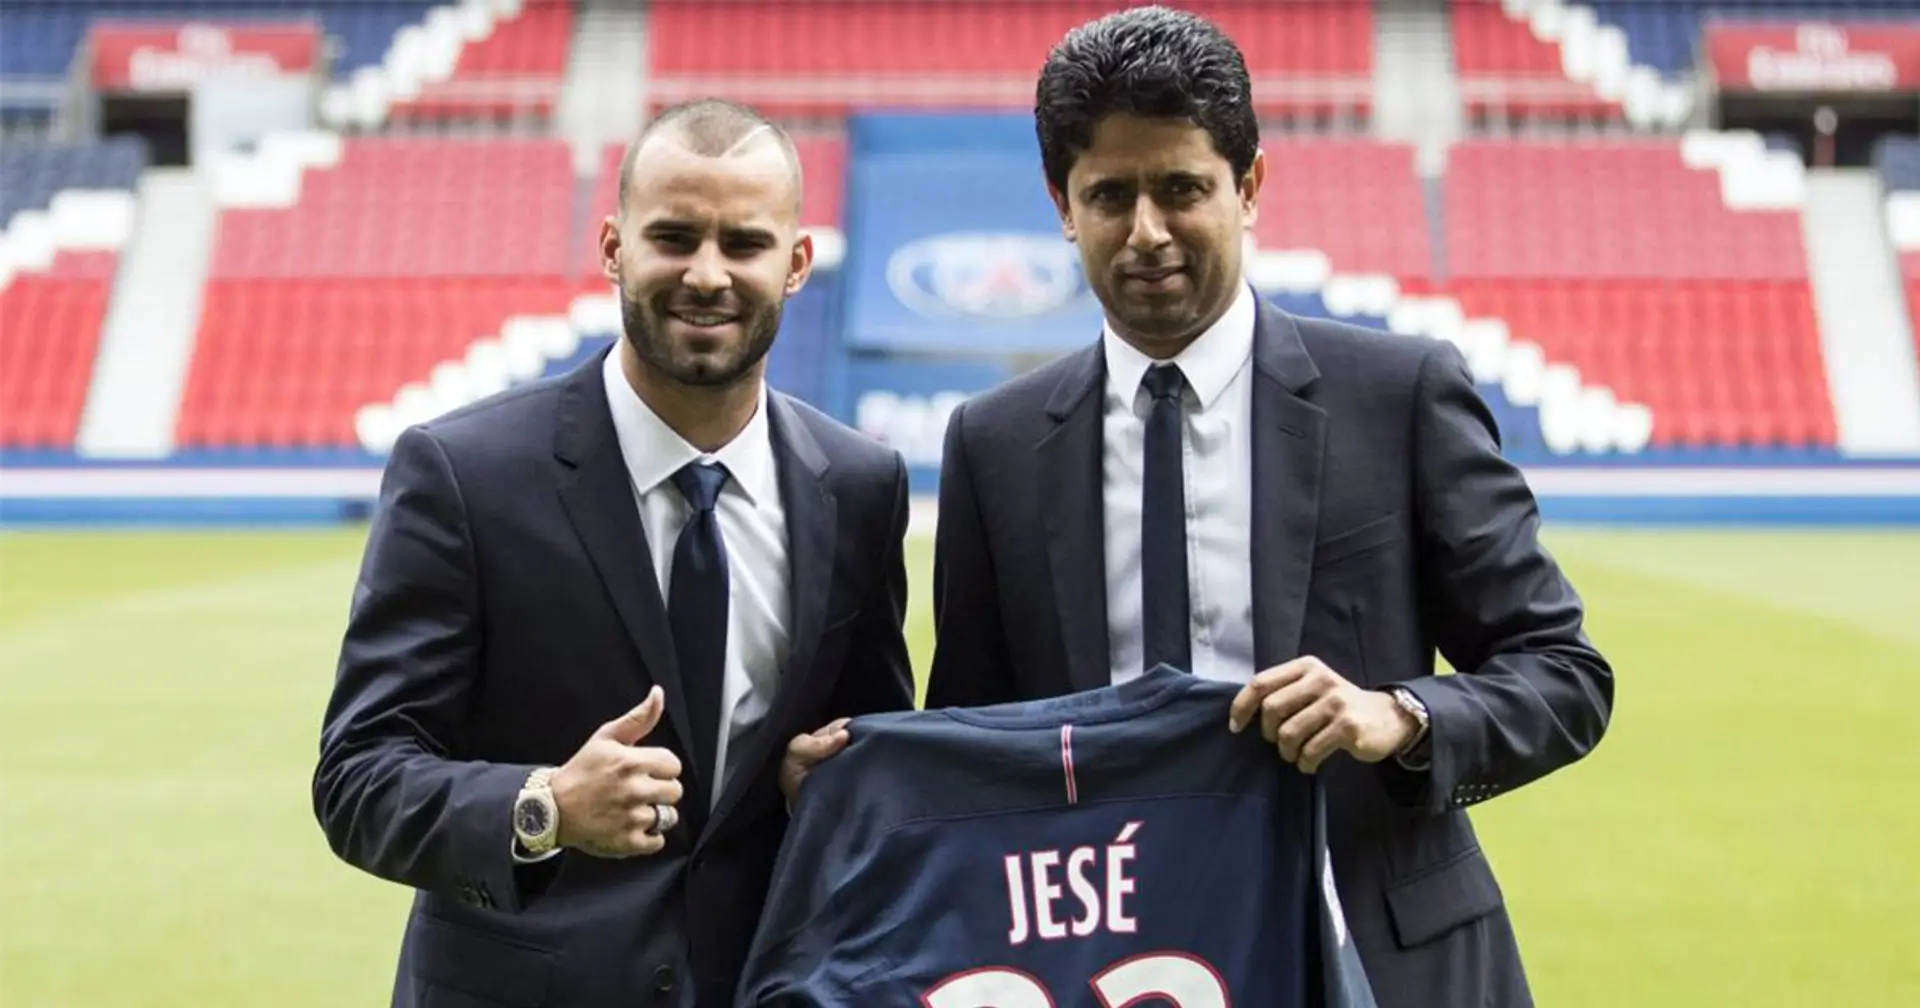 Ex-Madridista Jese becomes Ligue 1 champion despite making just one-minute appearance